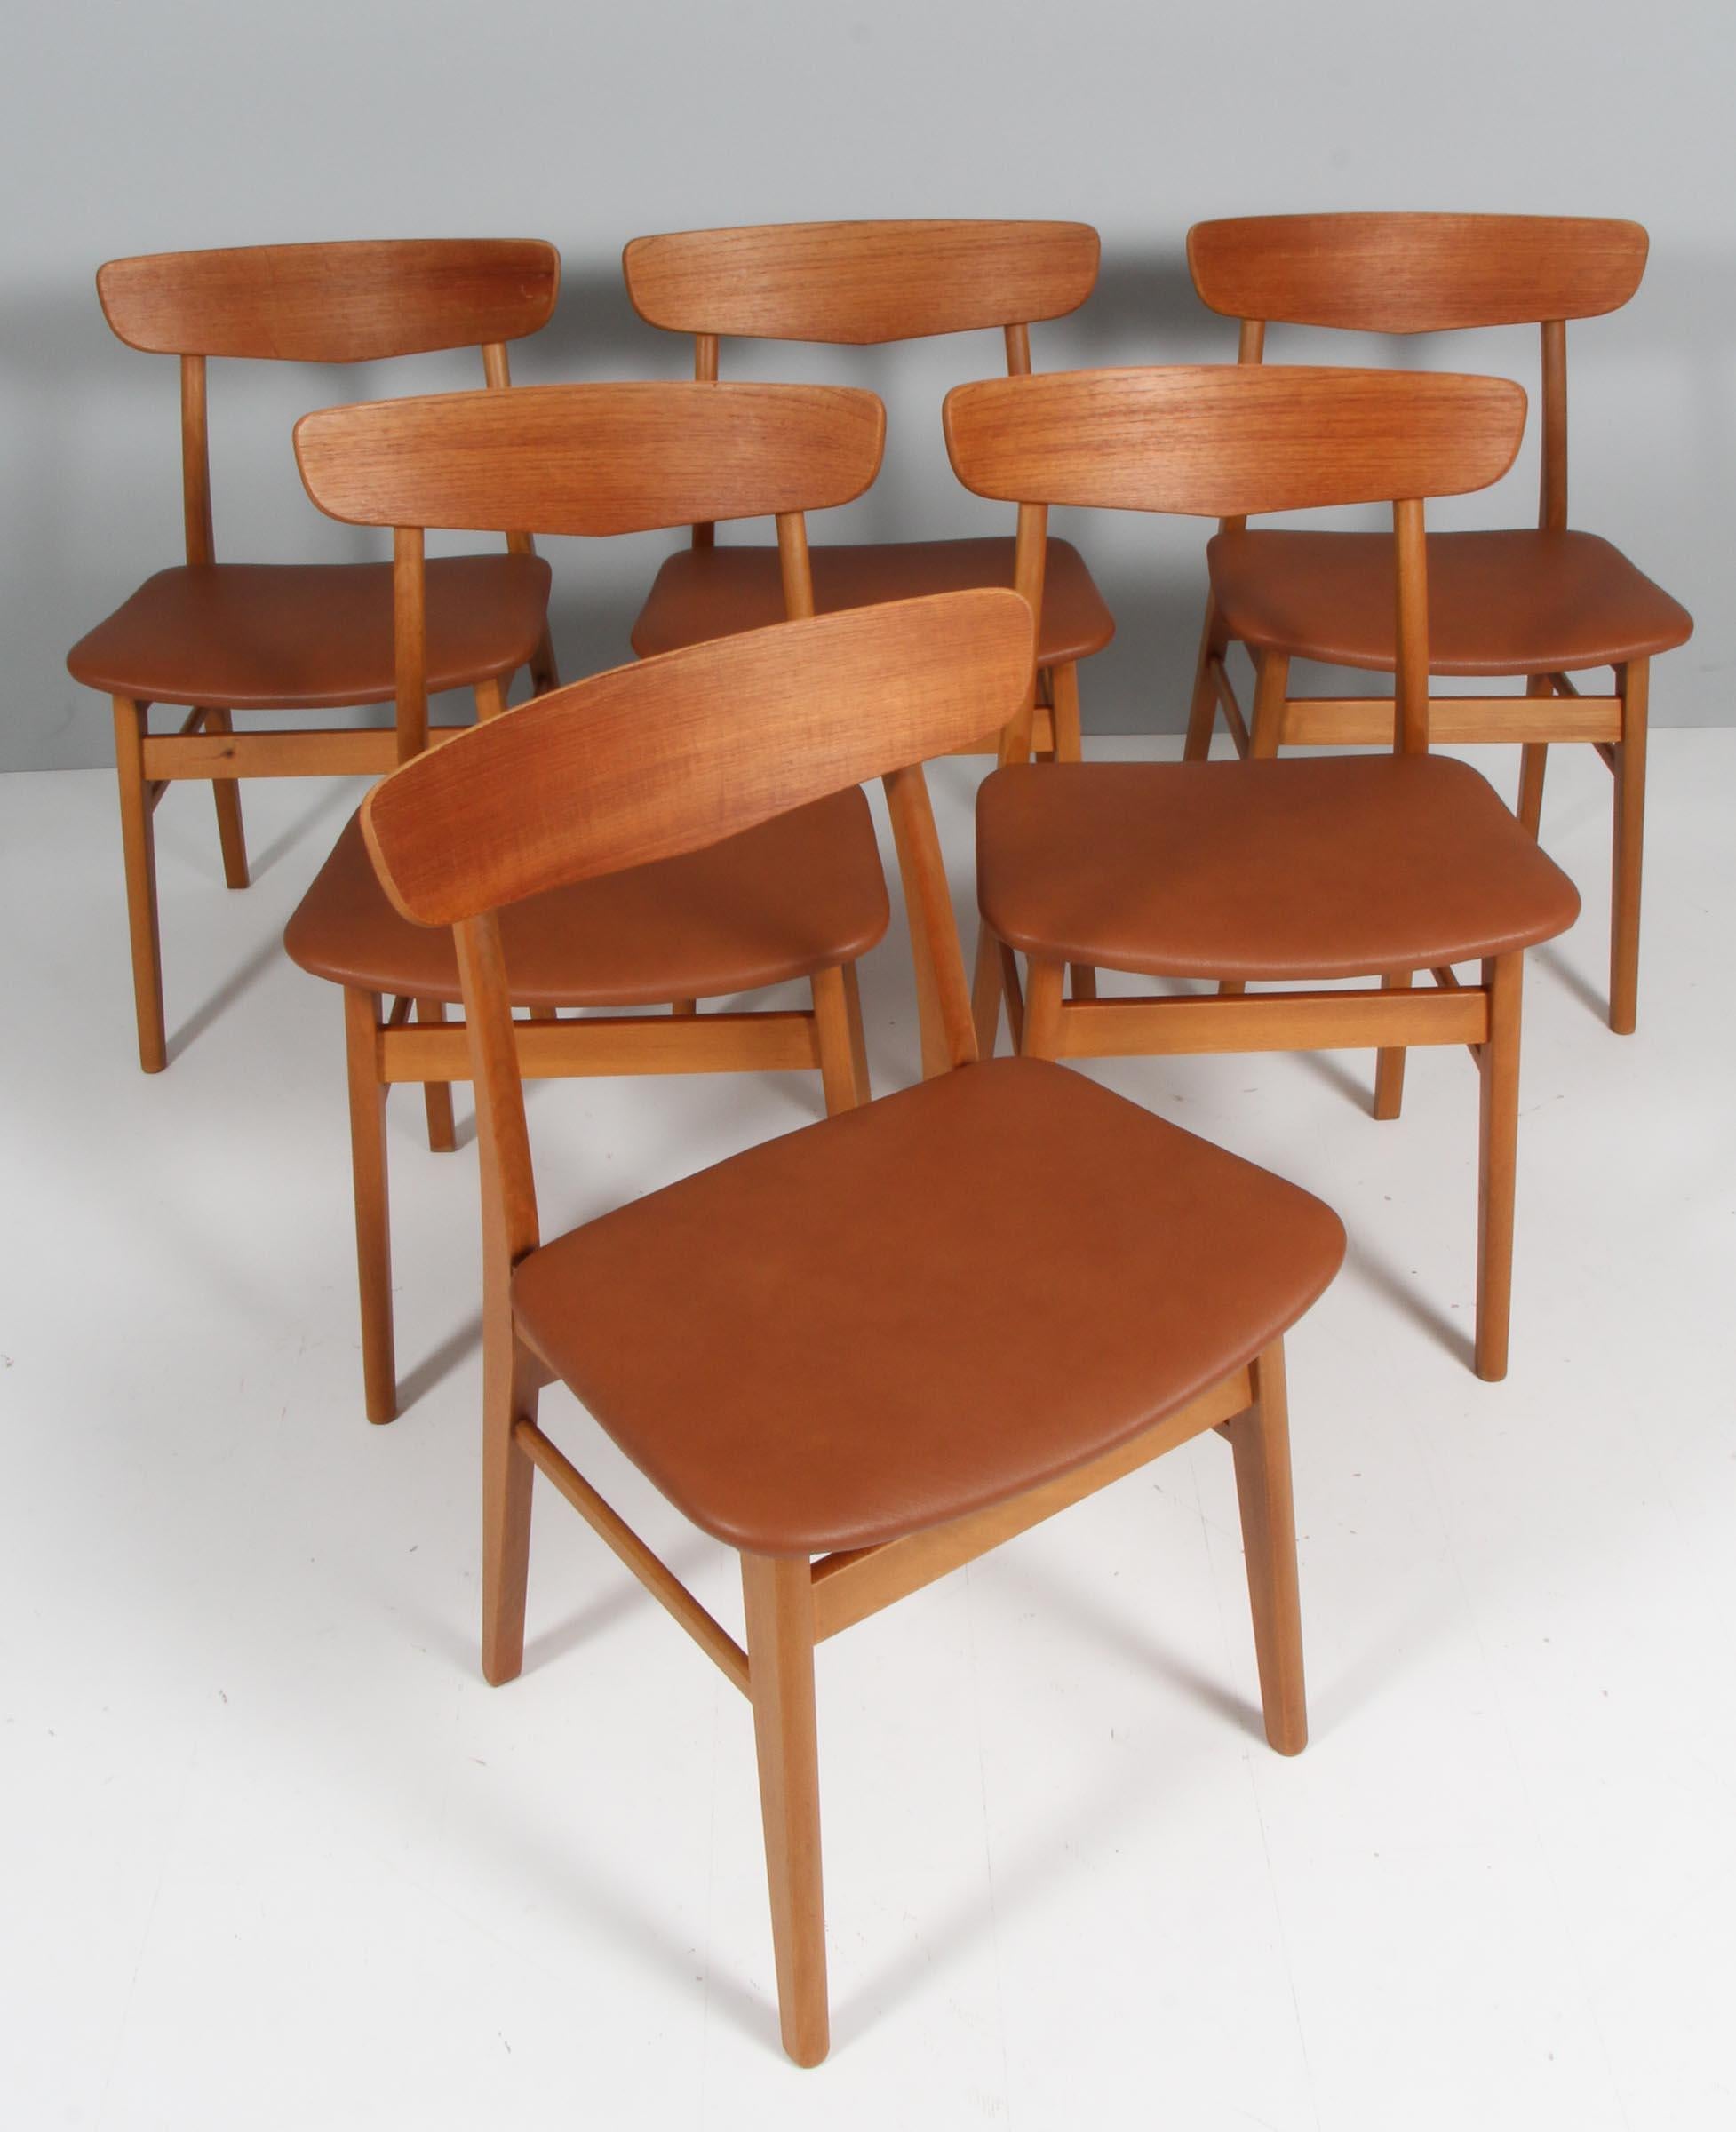 Farstrup set of six dining chairs with frame of solid beech, backrest of veenered teak.

Upholstered with cognac aniline leather.

Made by Farstrup.